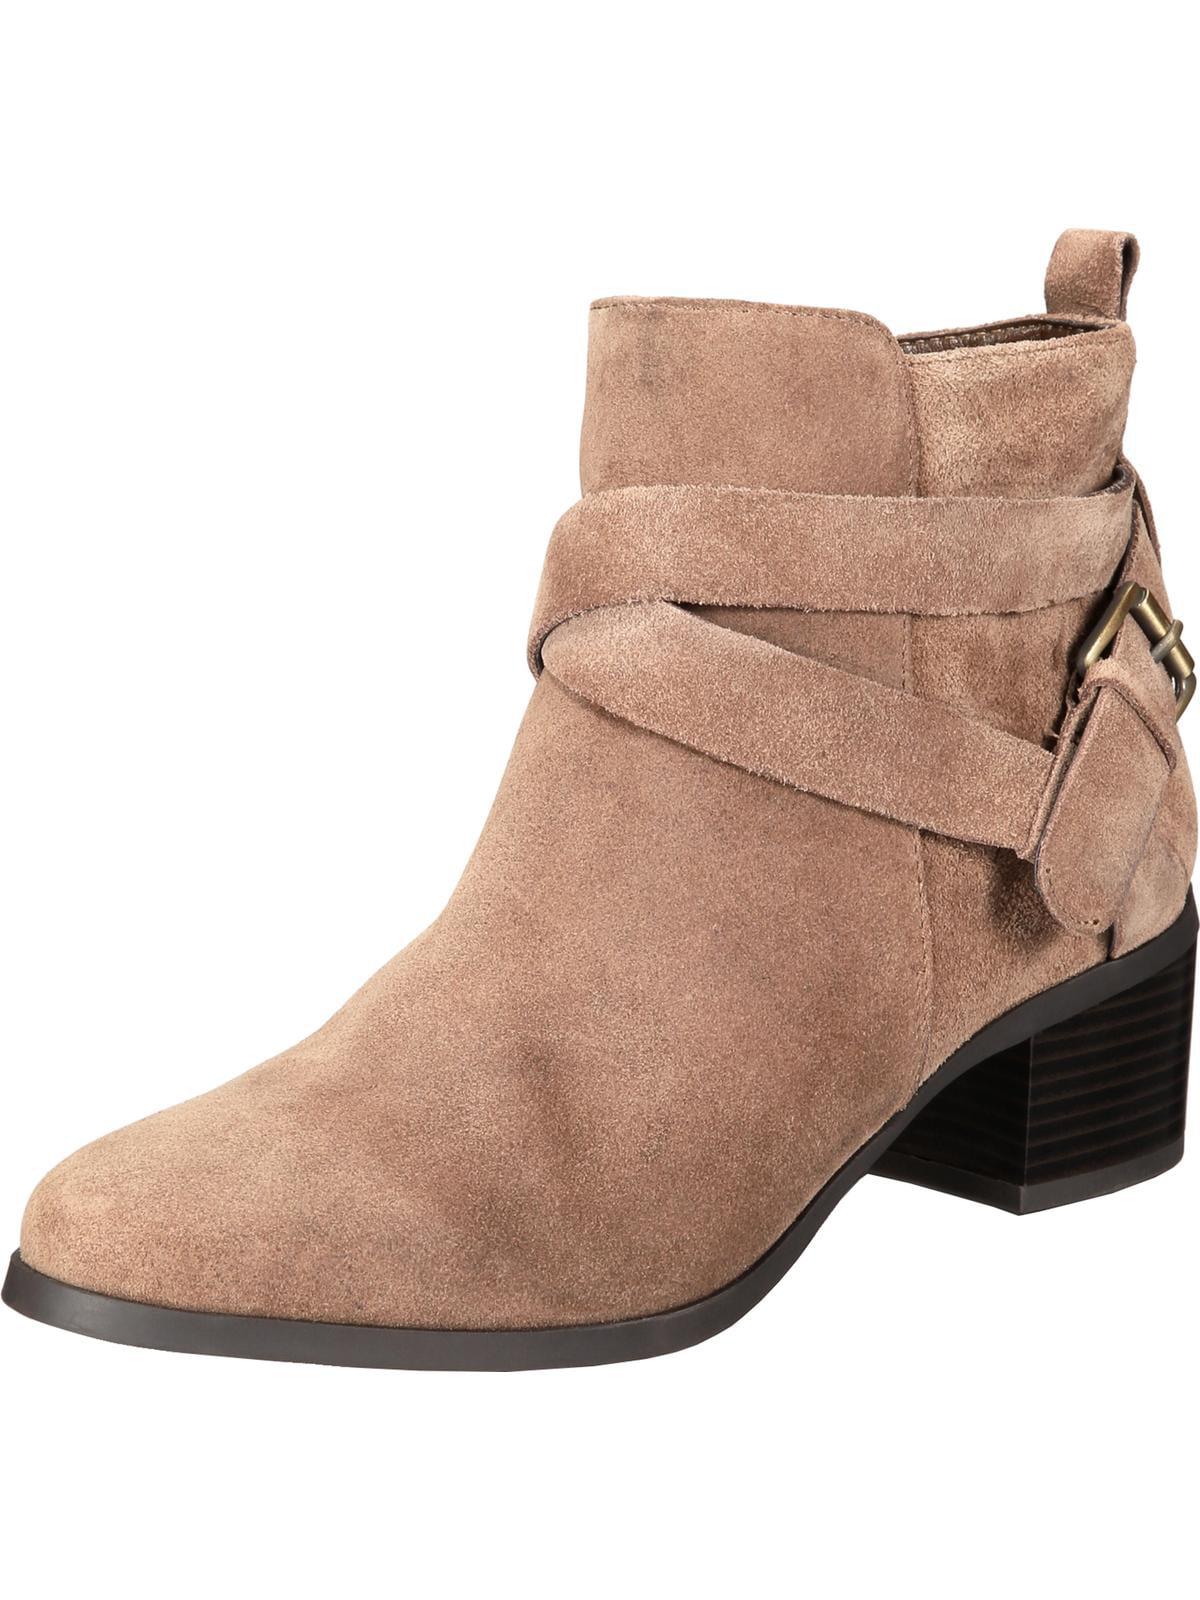 anne klein womens ankle boots